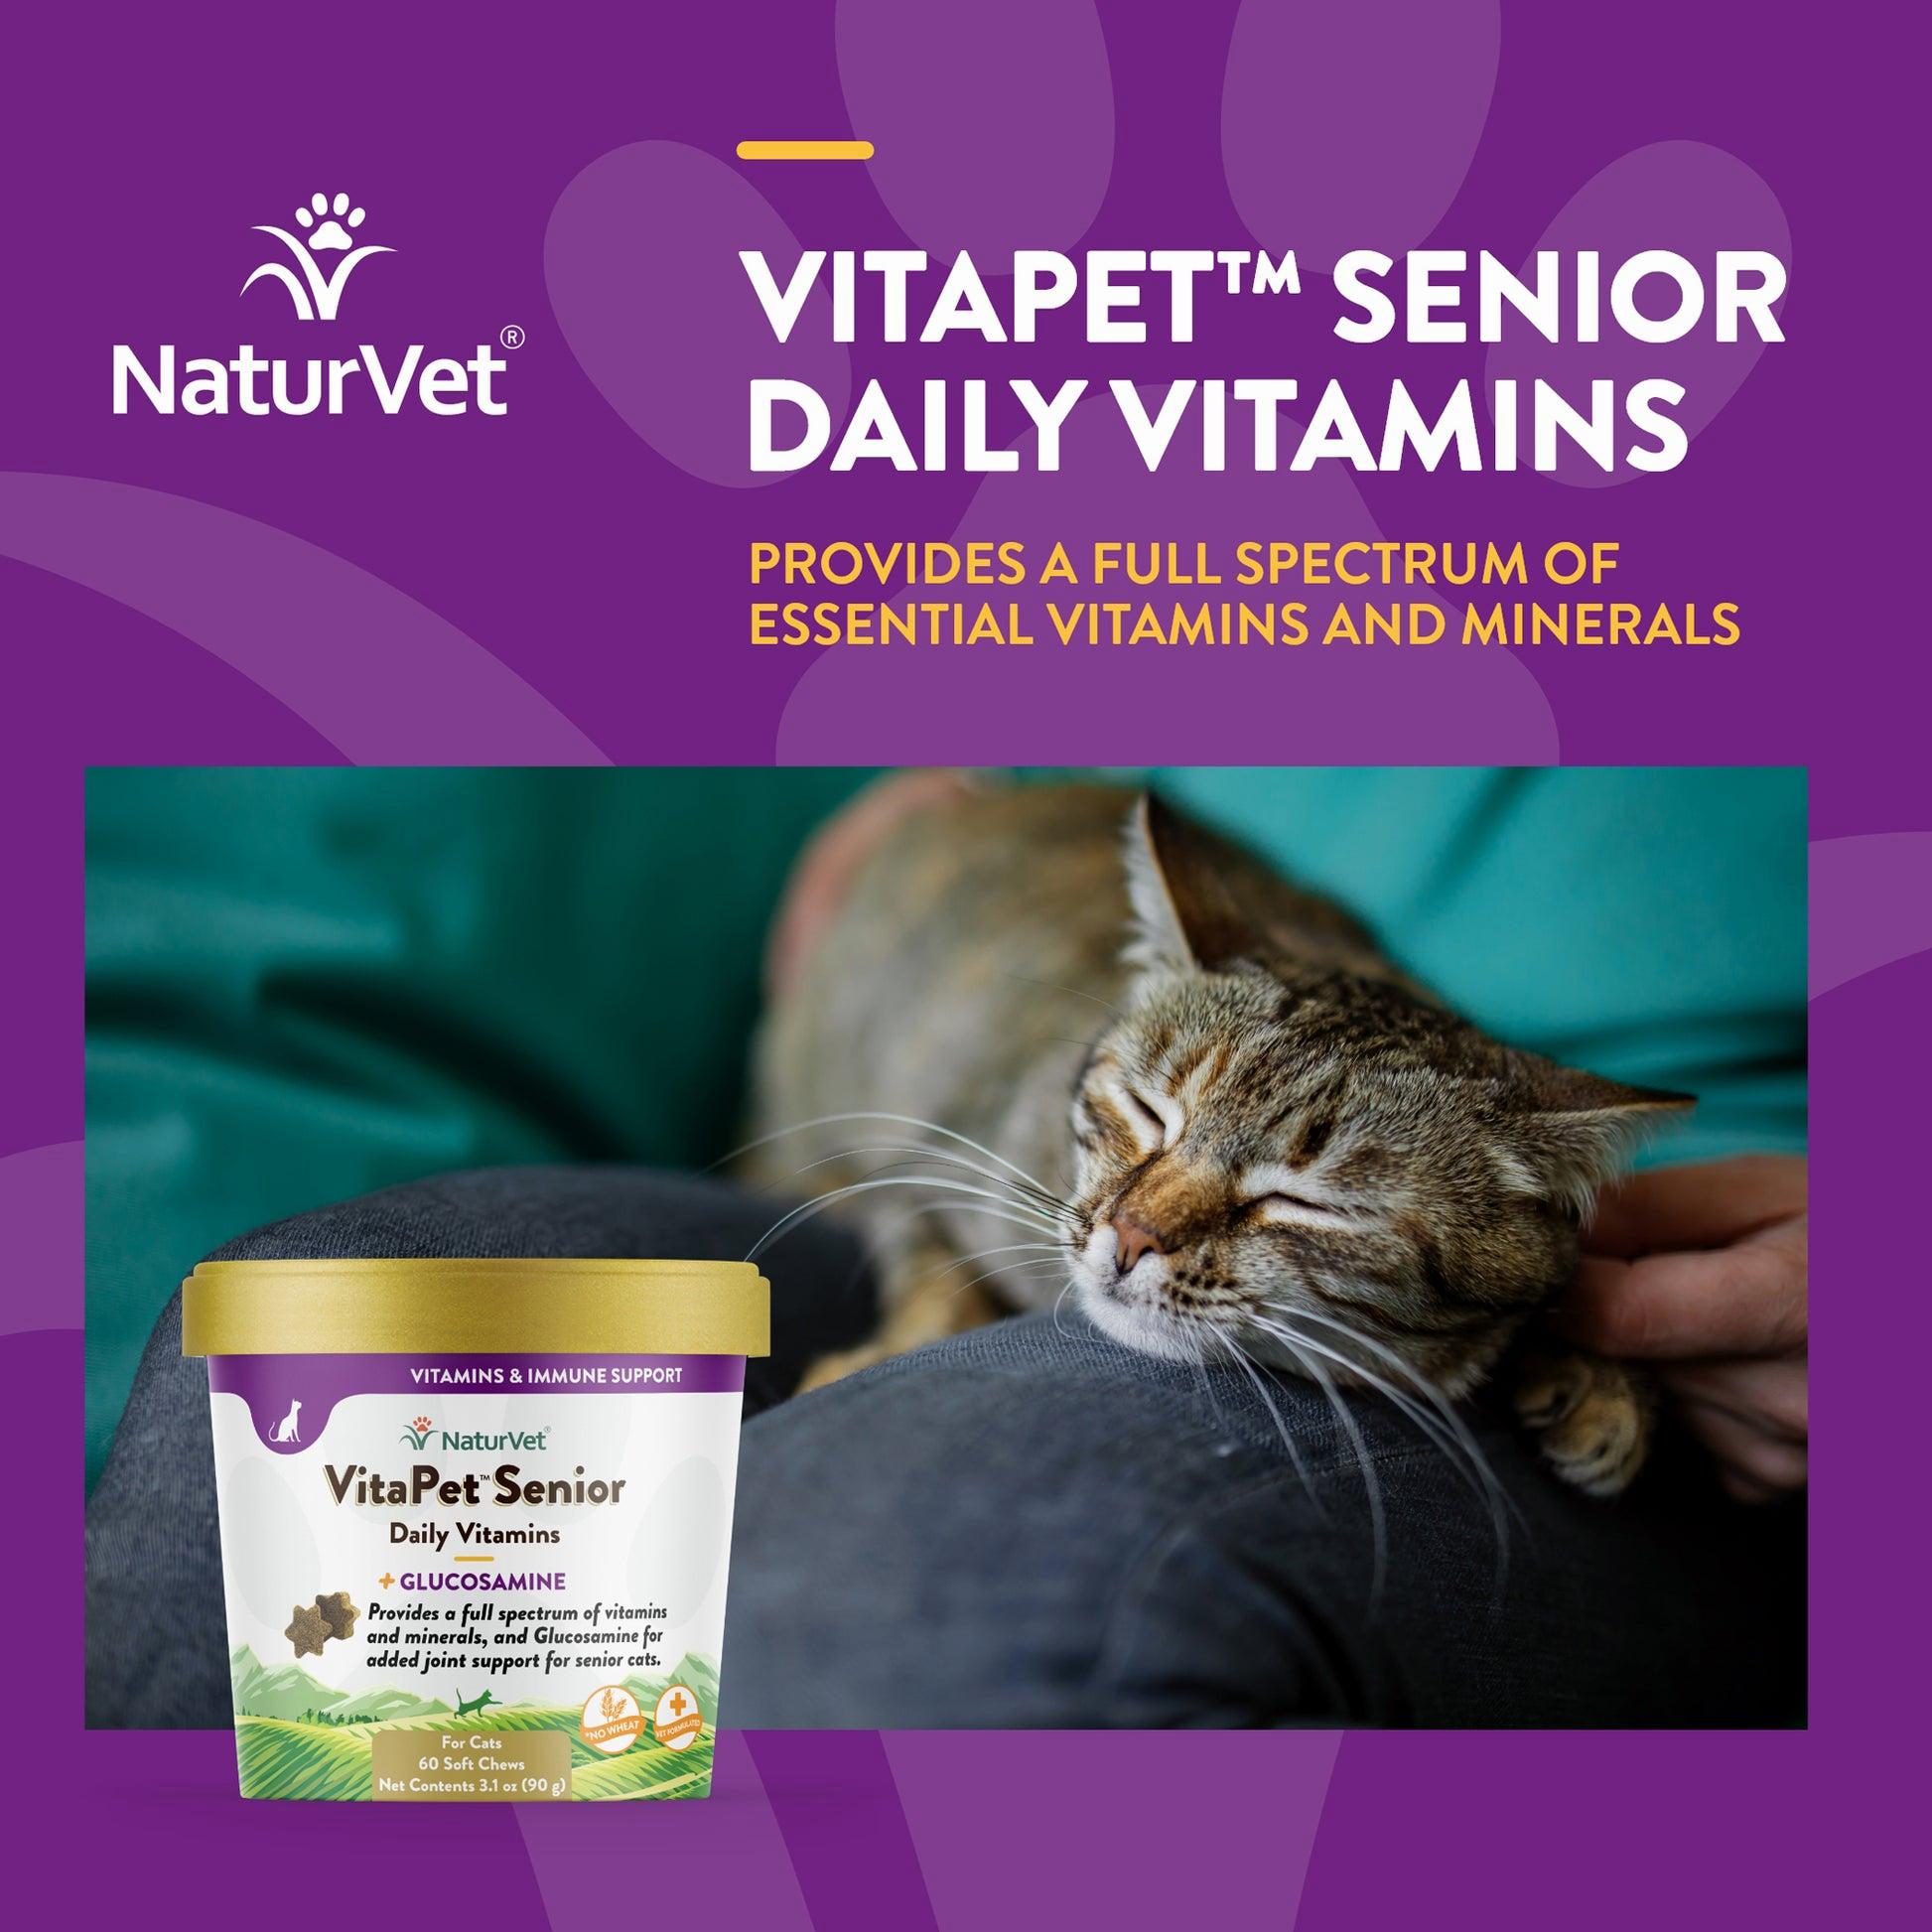 A cat is sleeping in front of a bottle of NaturVet VitaPet Senior Daily Vitamins, a vitamin supplement for senior cats.